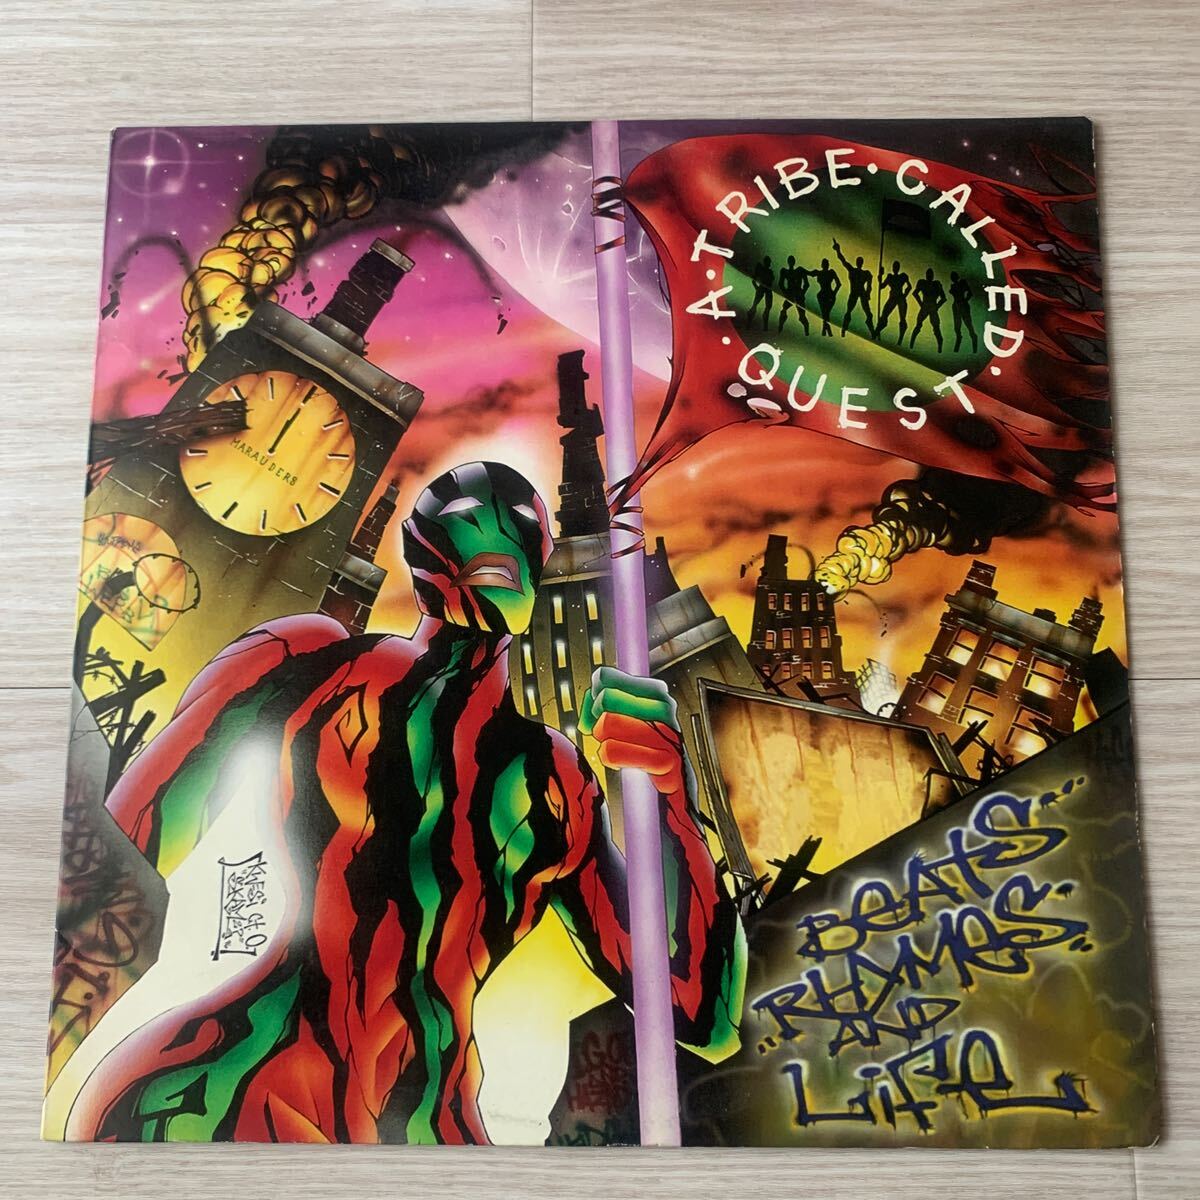 A Tribe Called Quest - Beats, Rhymes And Life USオリジナル2LPレコード Jive 01241-41587-1_画像1